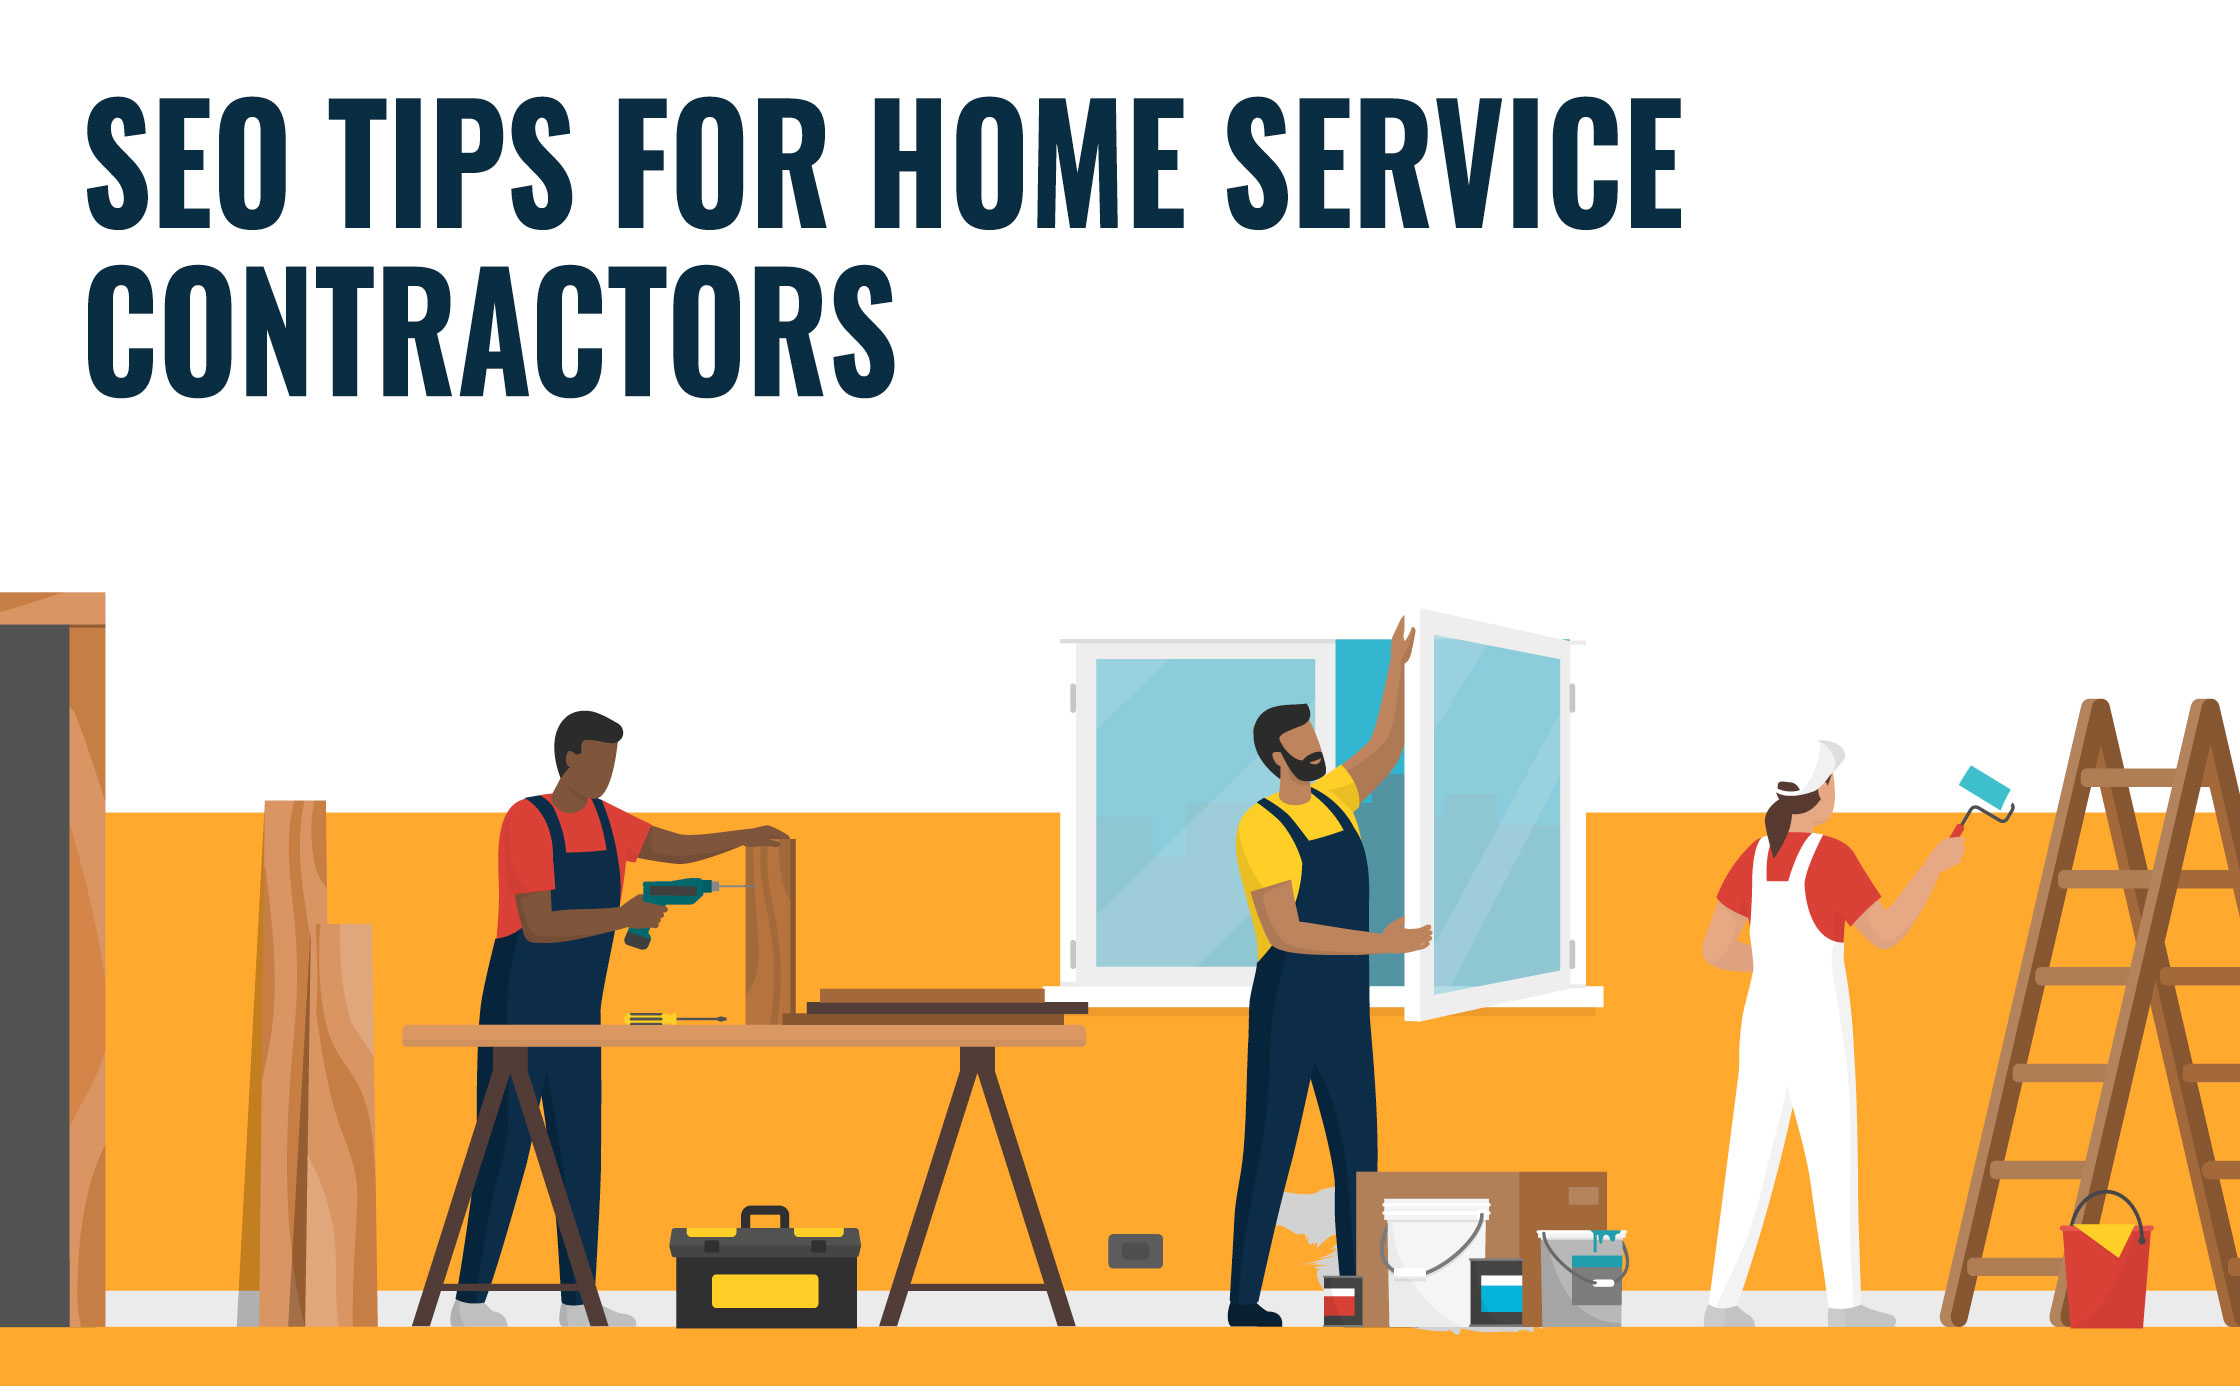 7 SEO Tips For Home Service Contractors